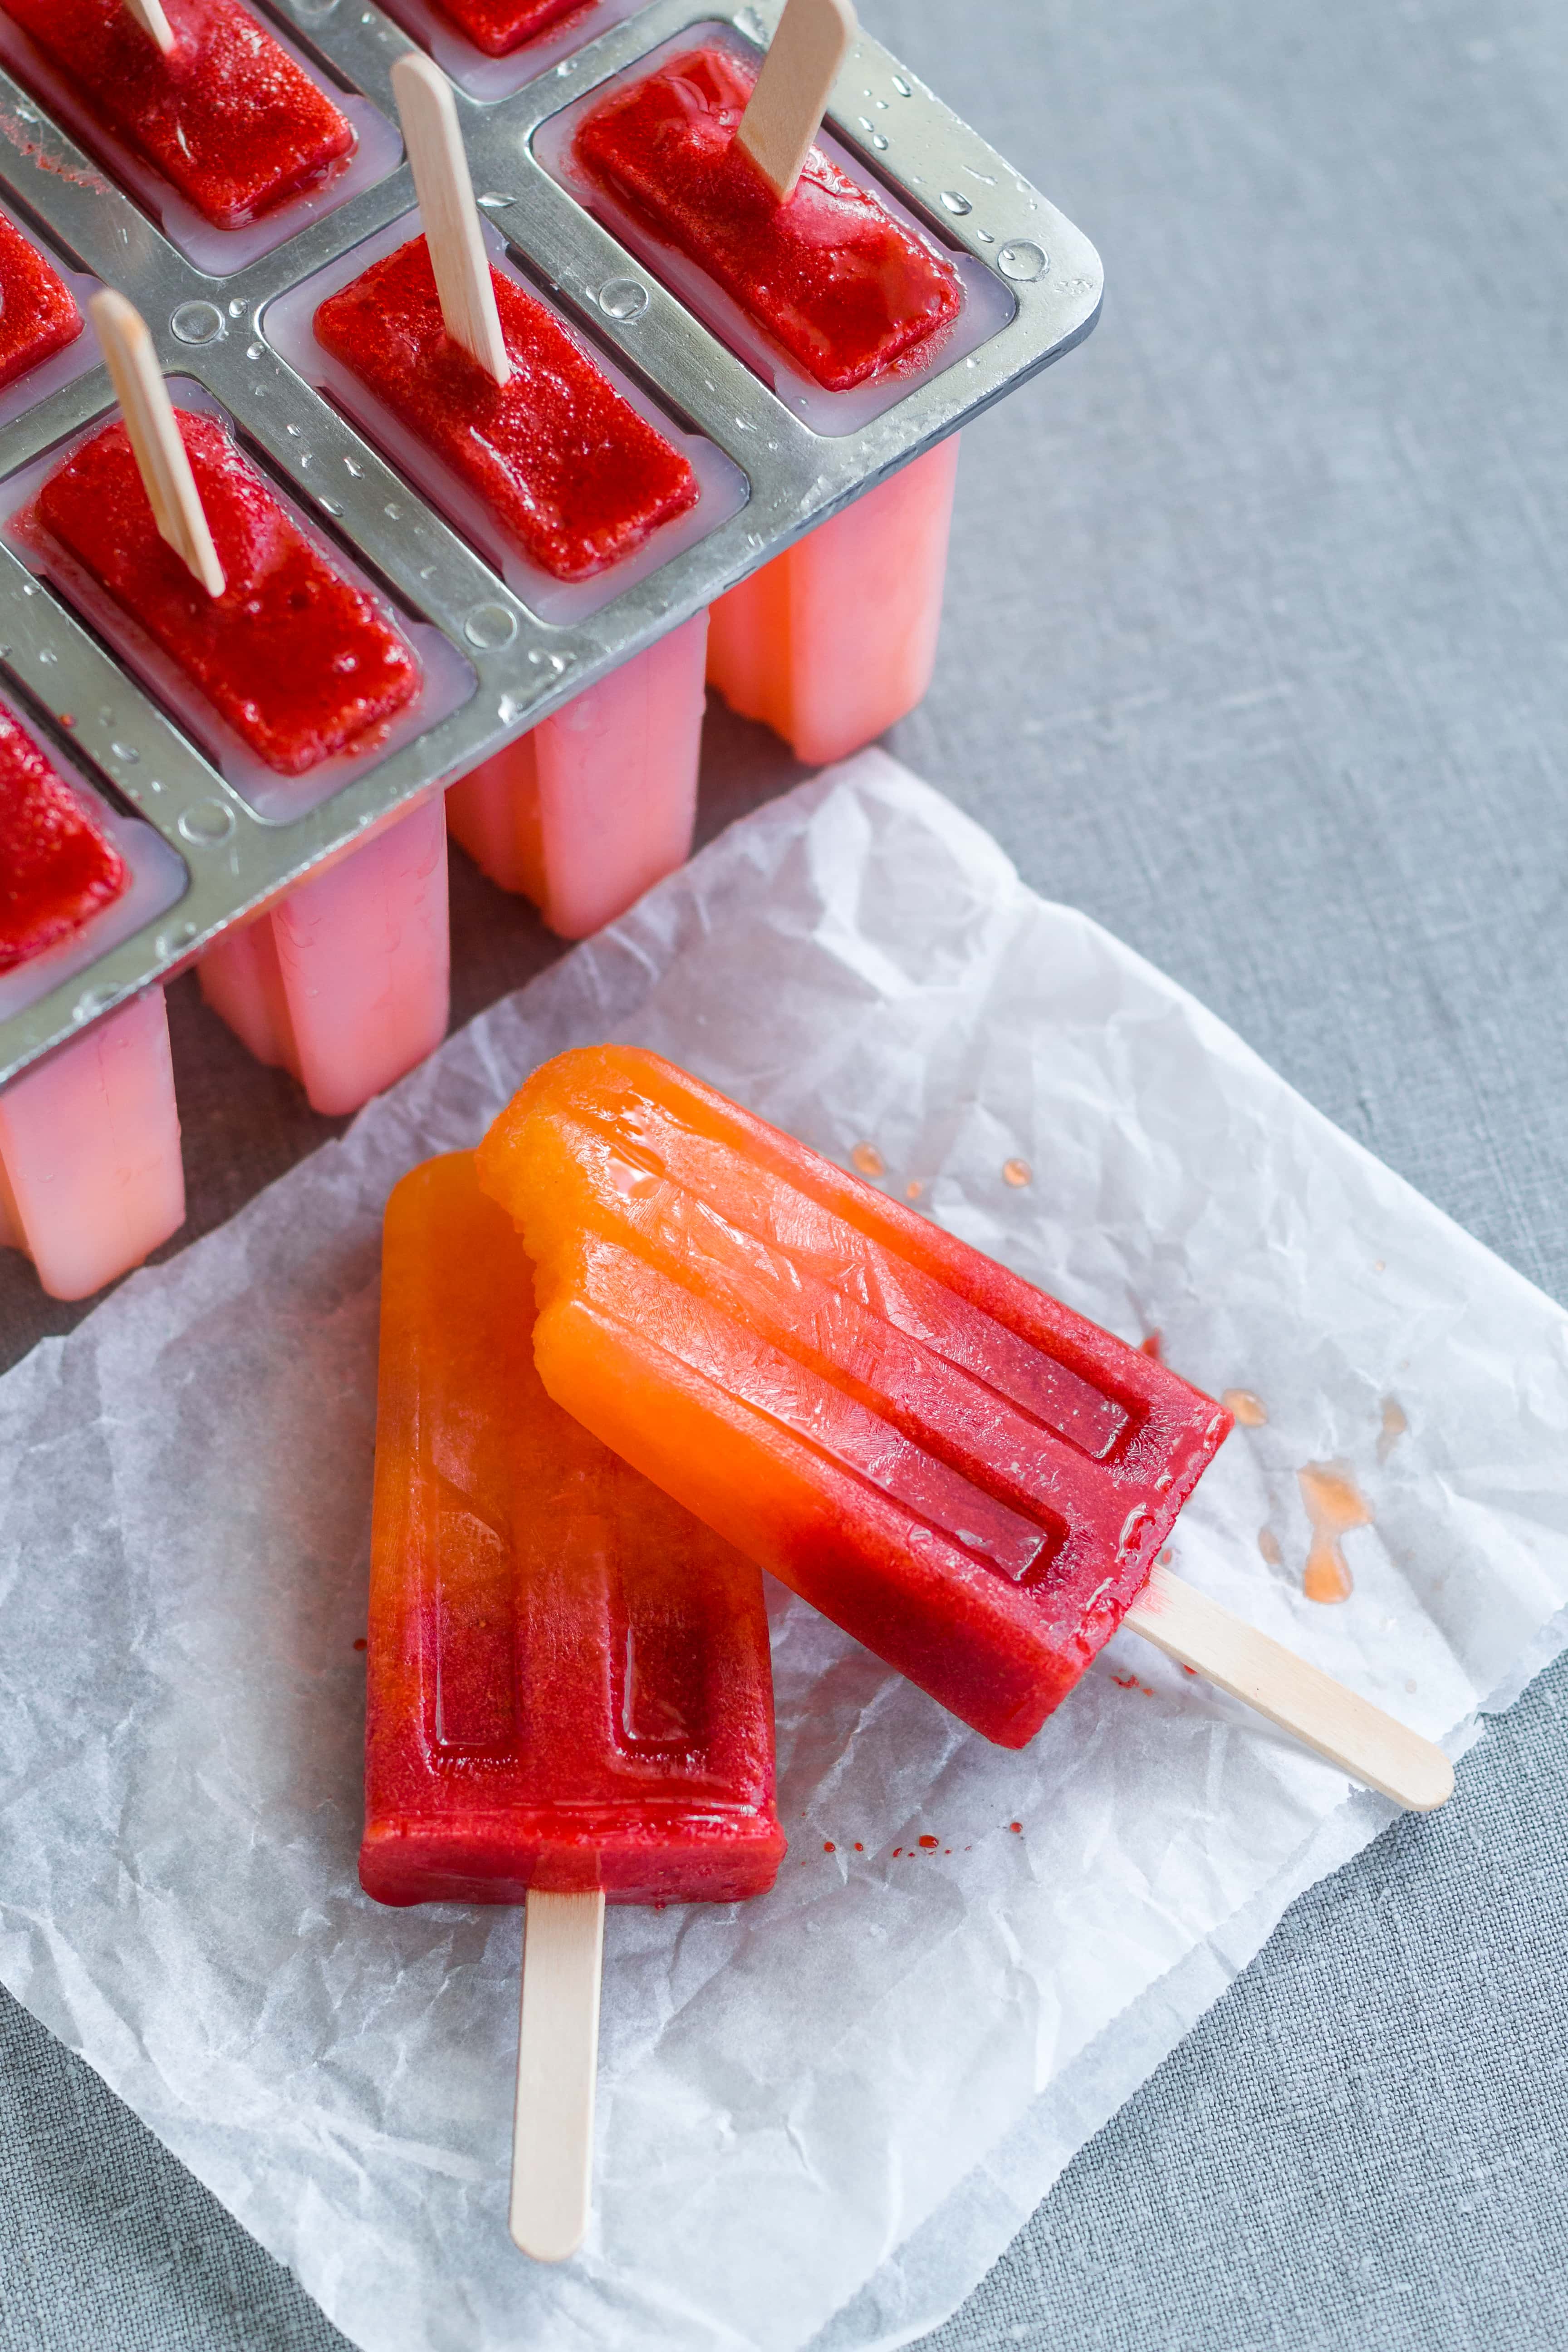 Orange Strawberry Sunrise Popsicles - treat yourself with homemade popsicles this summer. We LOVE these! They're easy to make, delicious, and actually healthy! (raw vegan) | thehealthfulideas.com